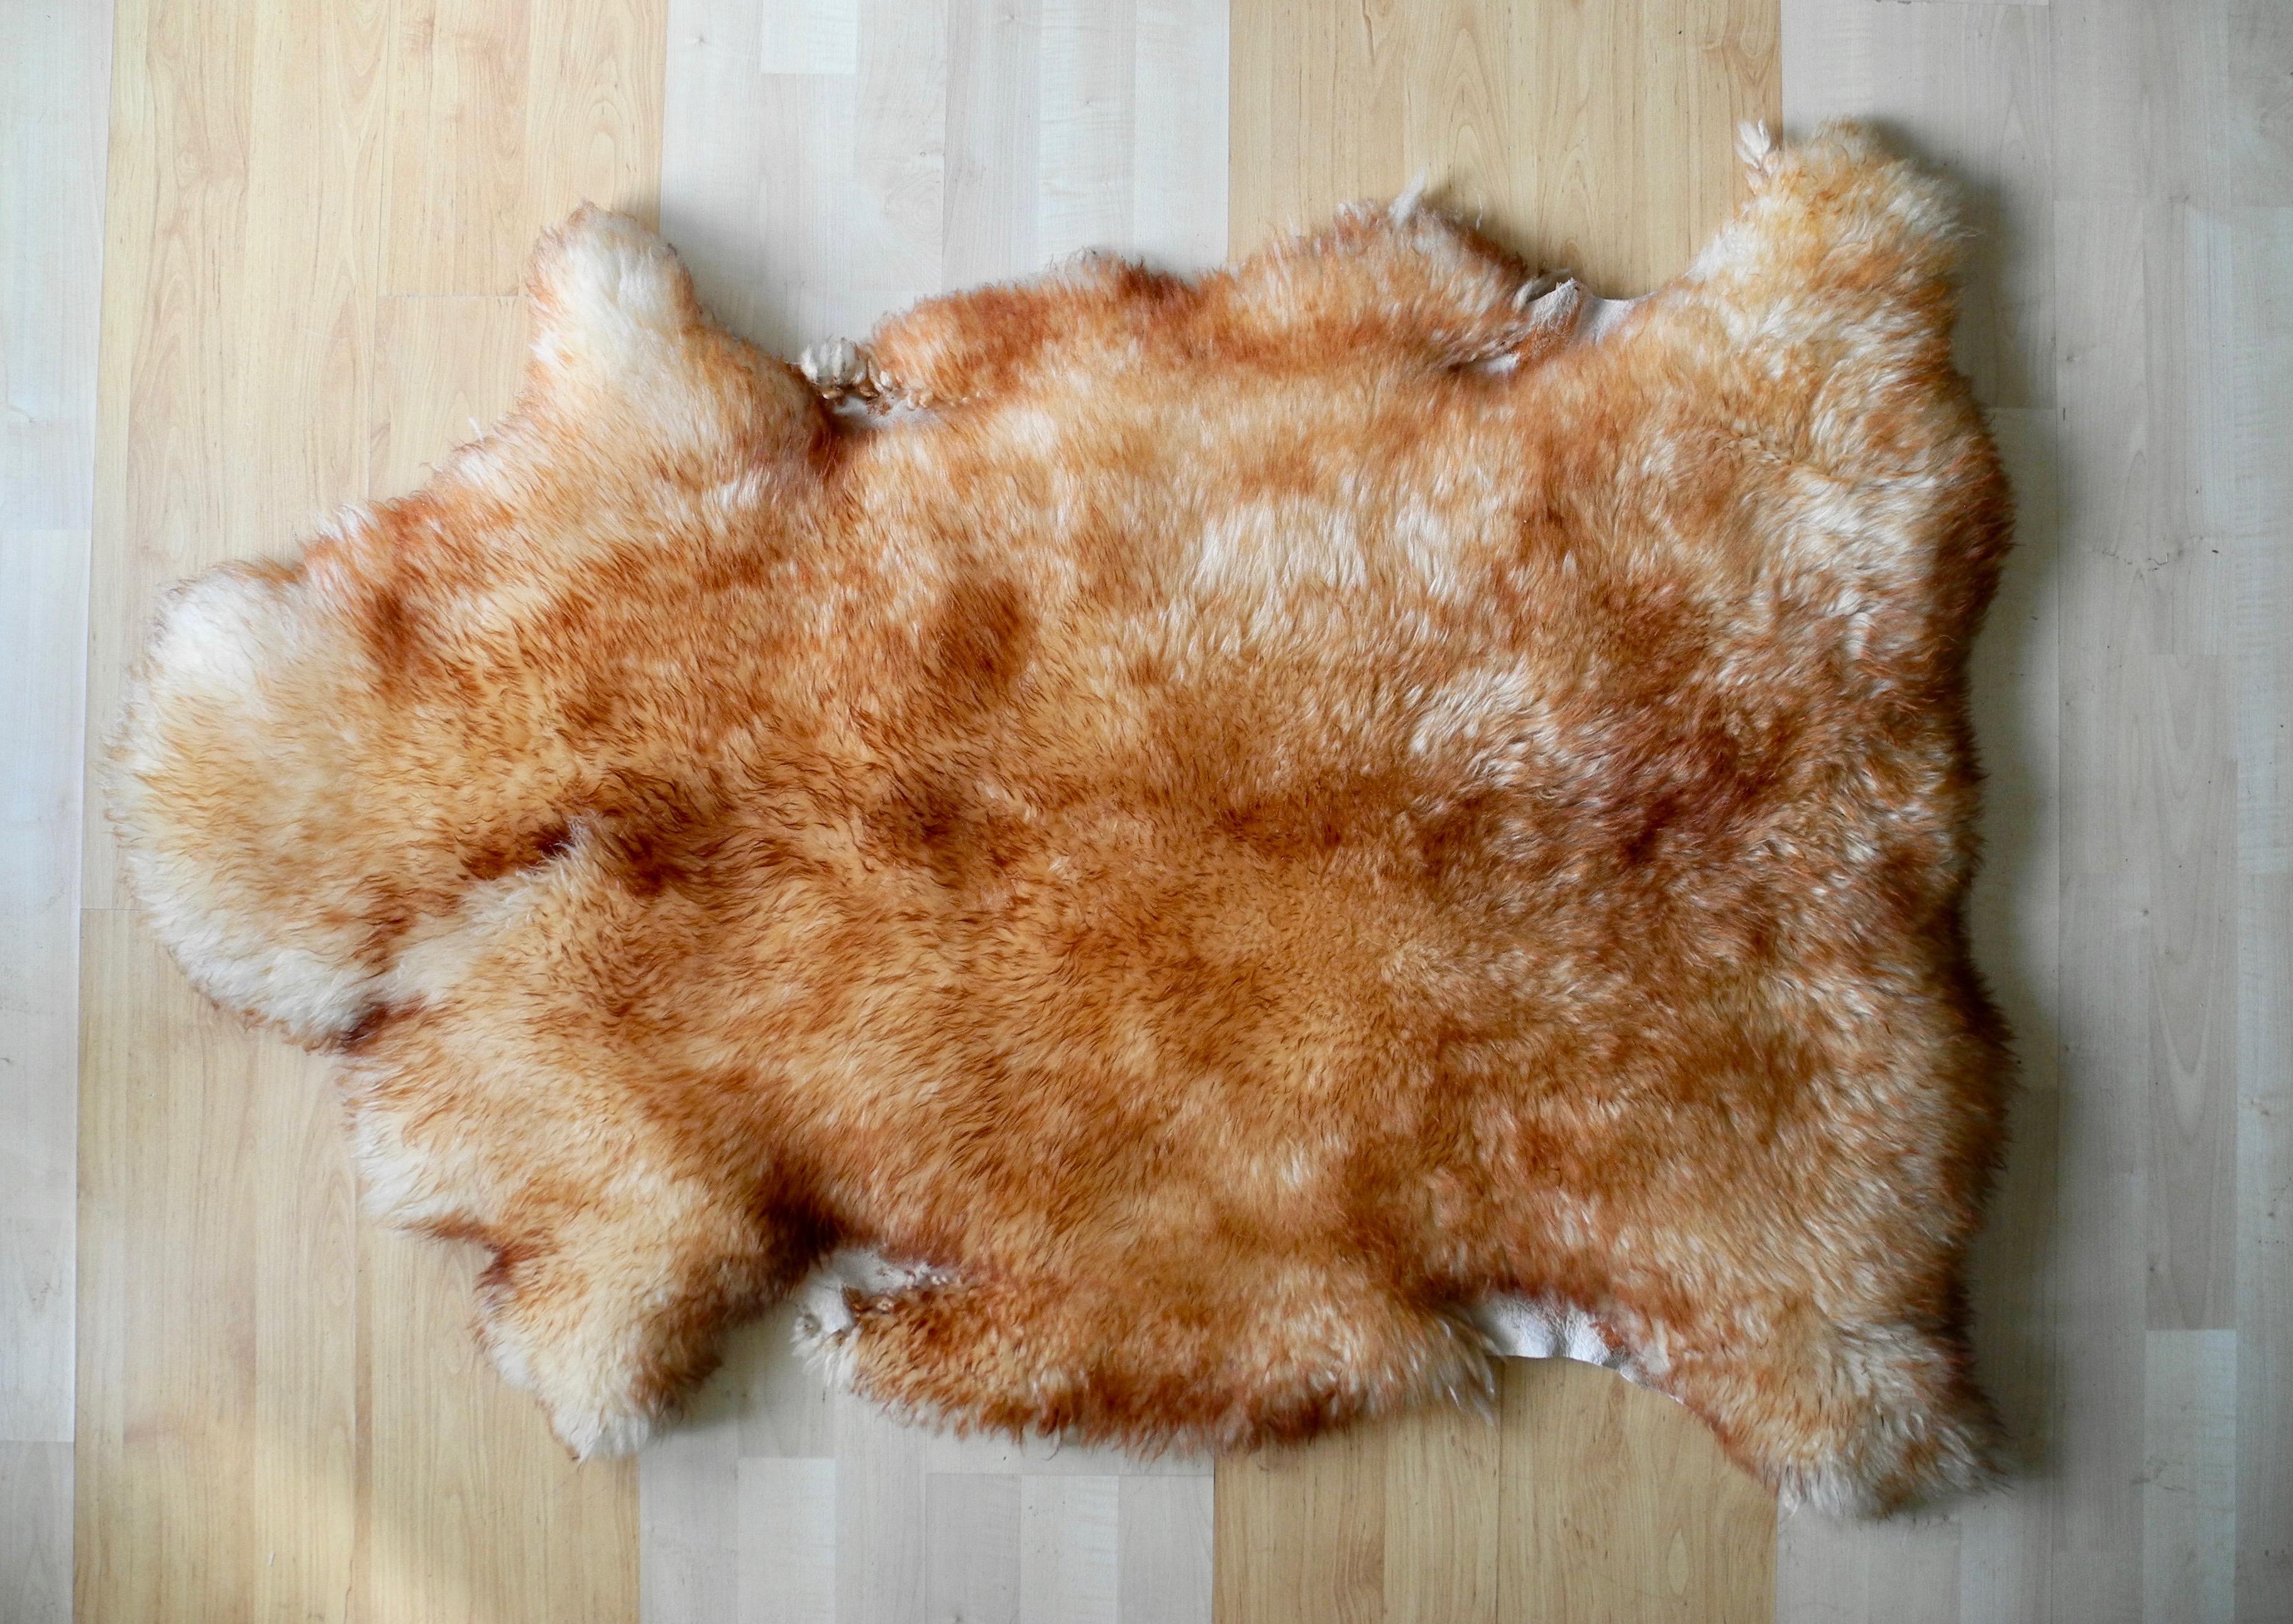 This large sheep skin is super soft and warm. Place on the floor or on a piece of metal furniture for warmth and comfort. It's also very boho chic.